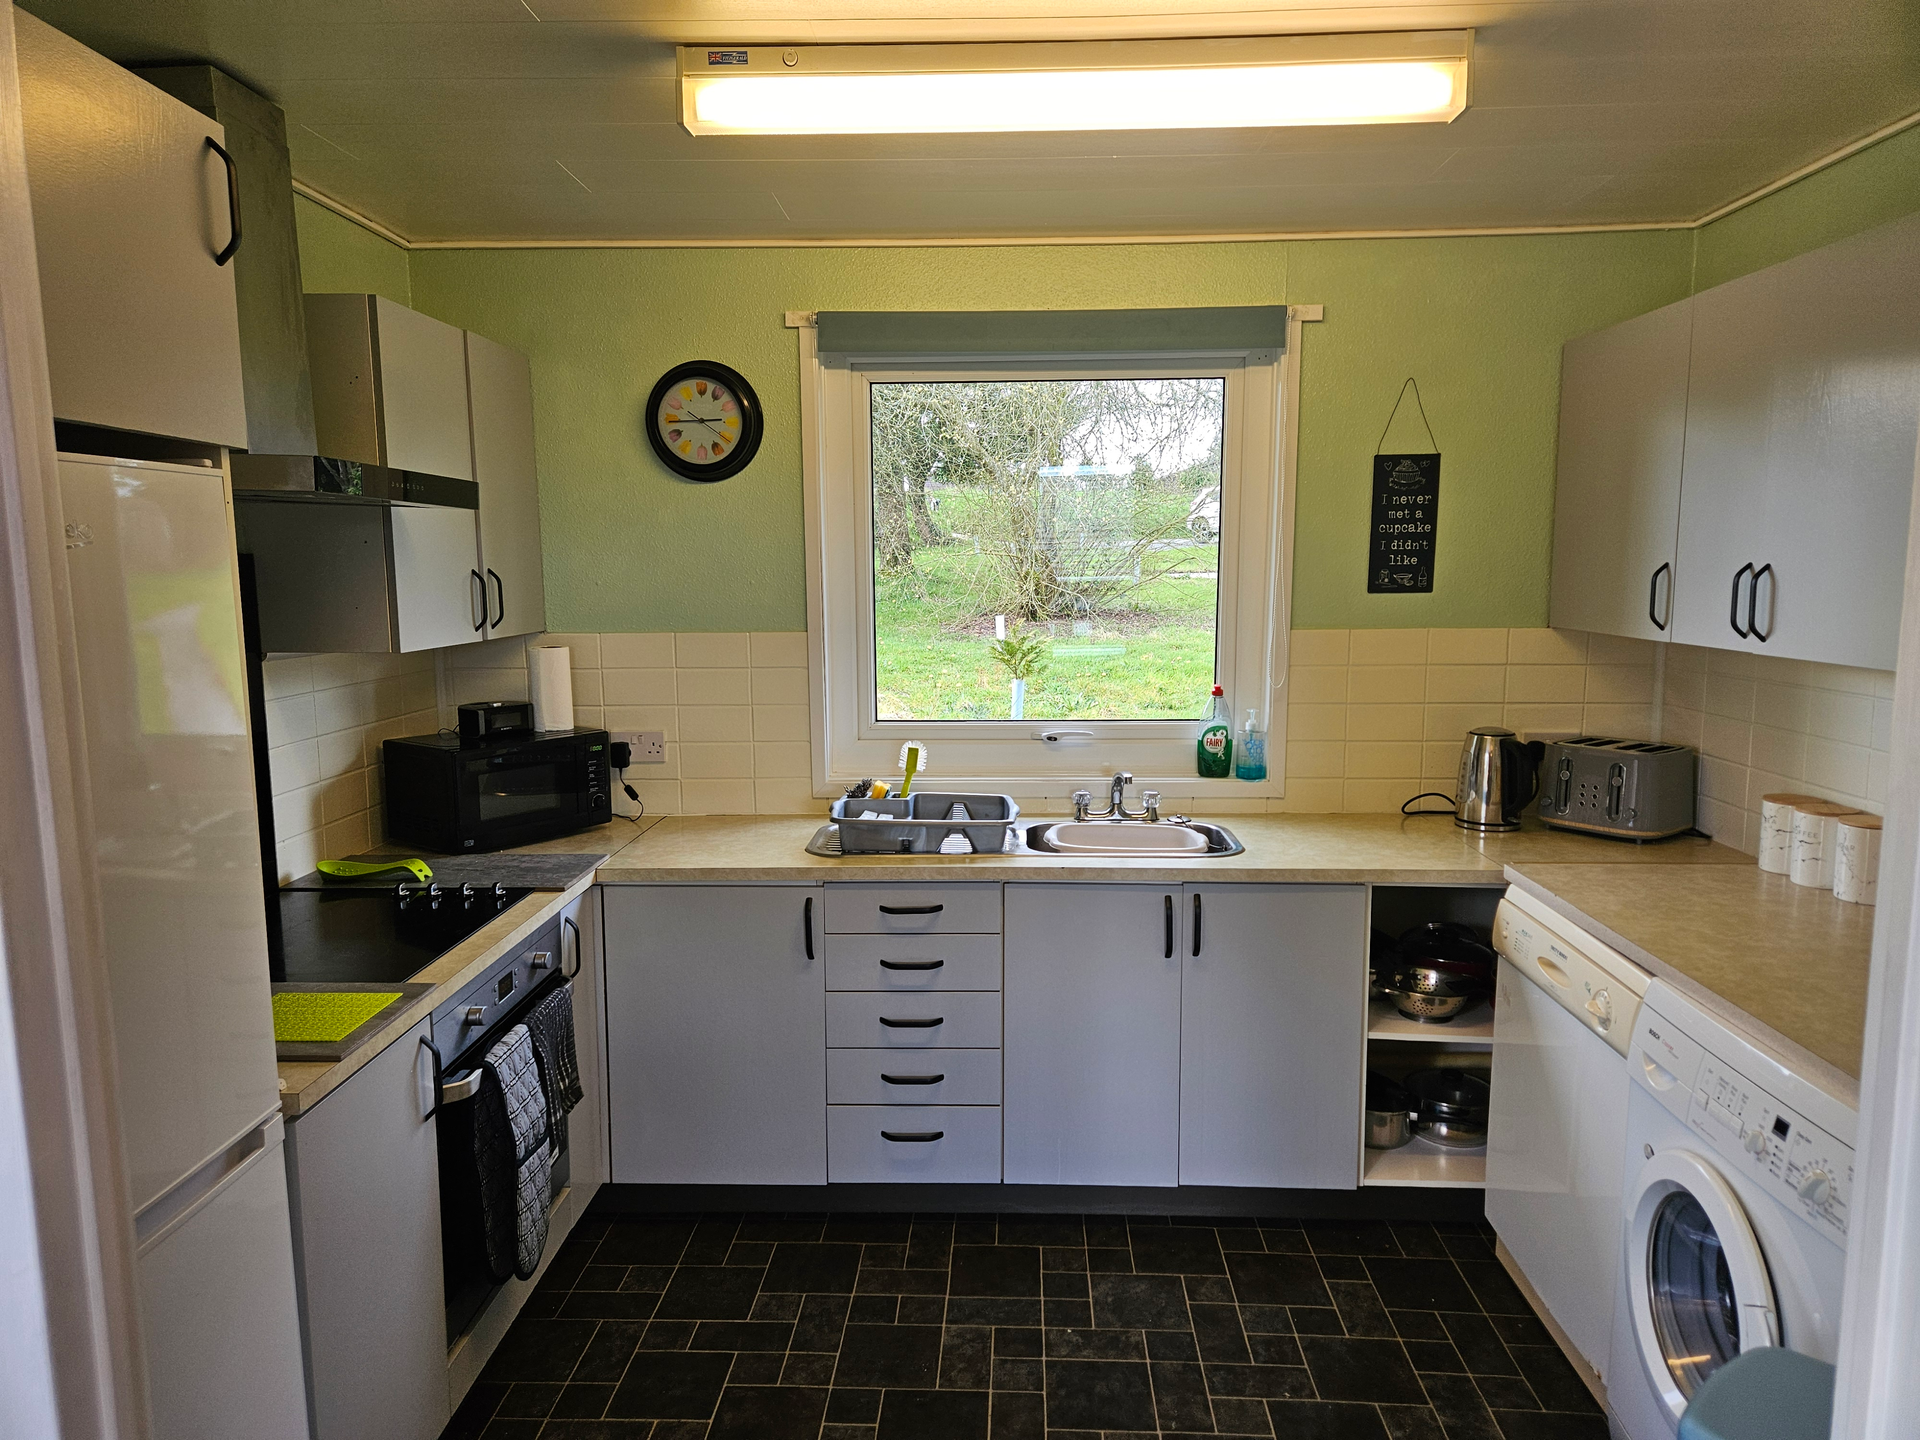 The kitchen which has all your main necessities, from oven, microwave, kettle, toaster, dishwasher, washing machine etc